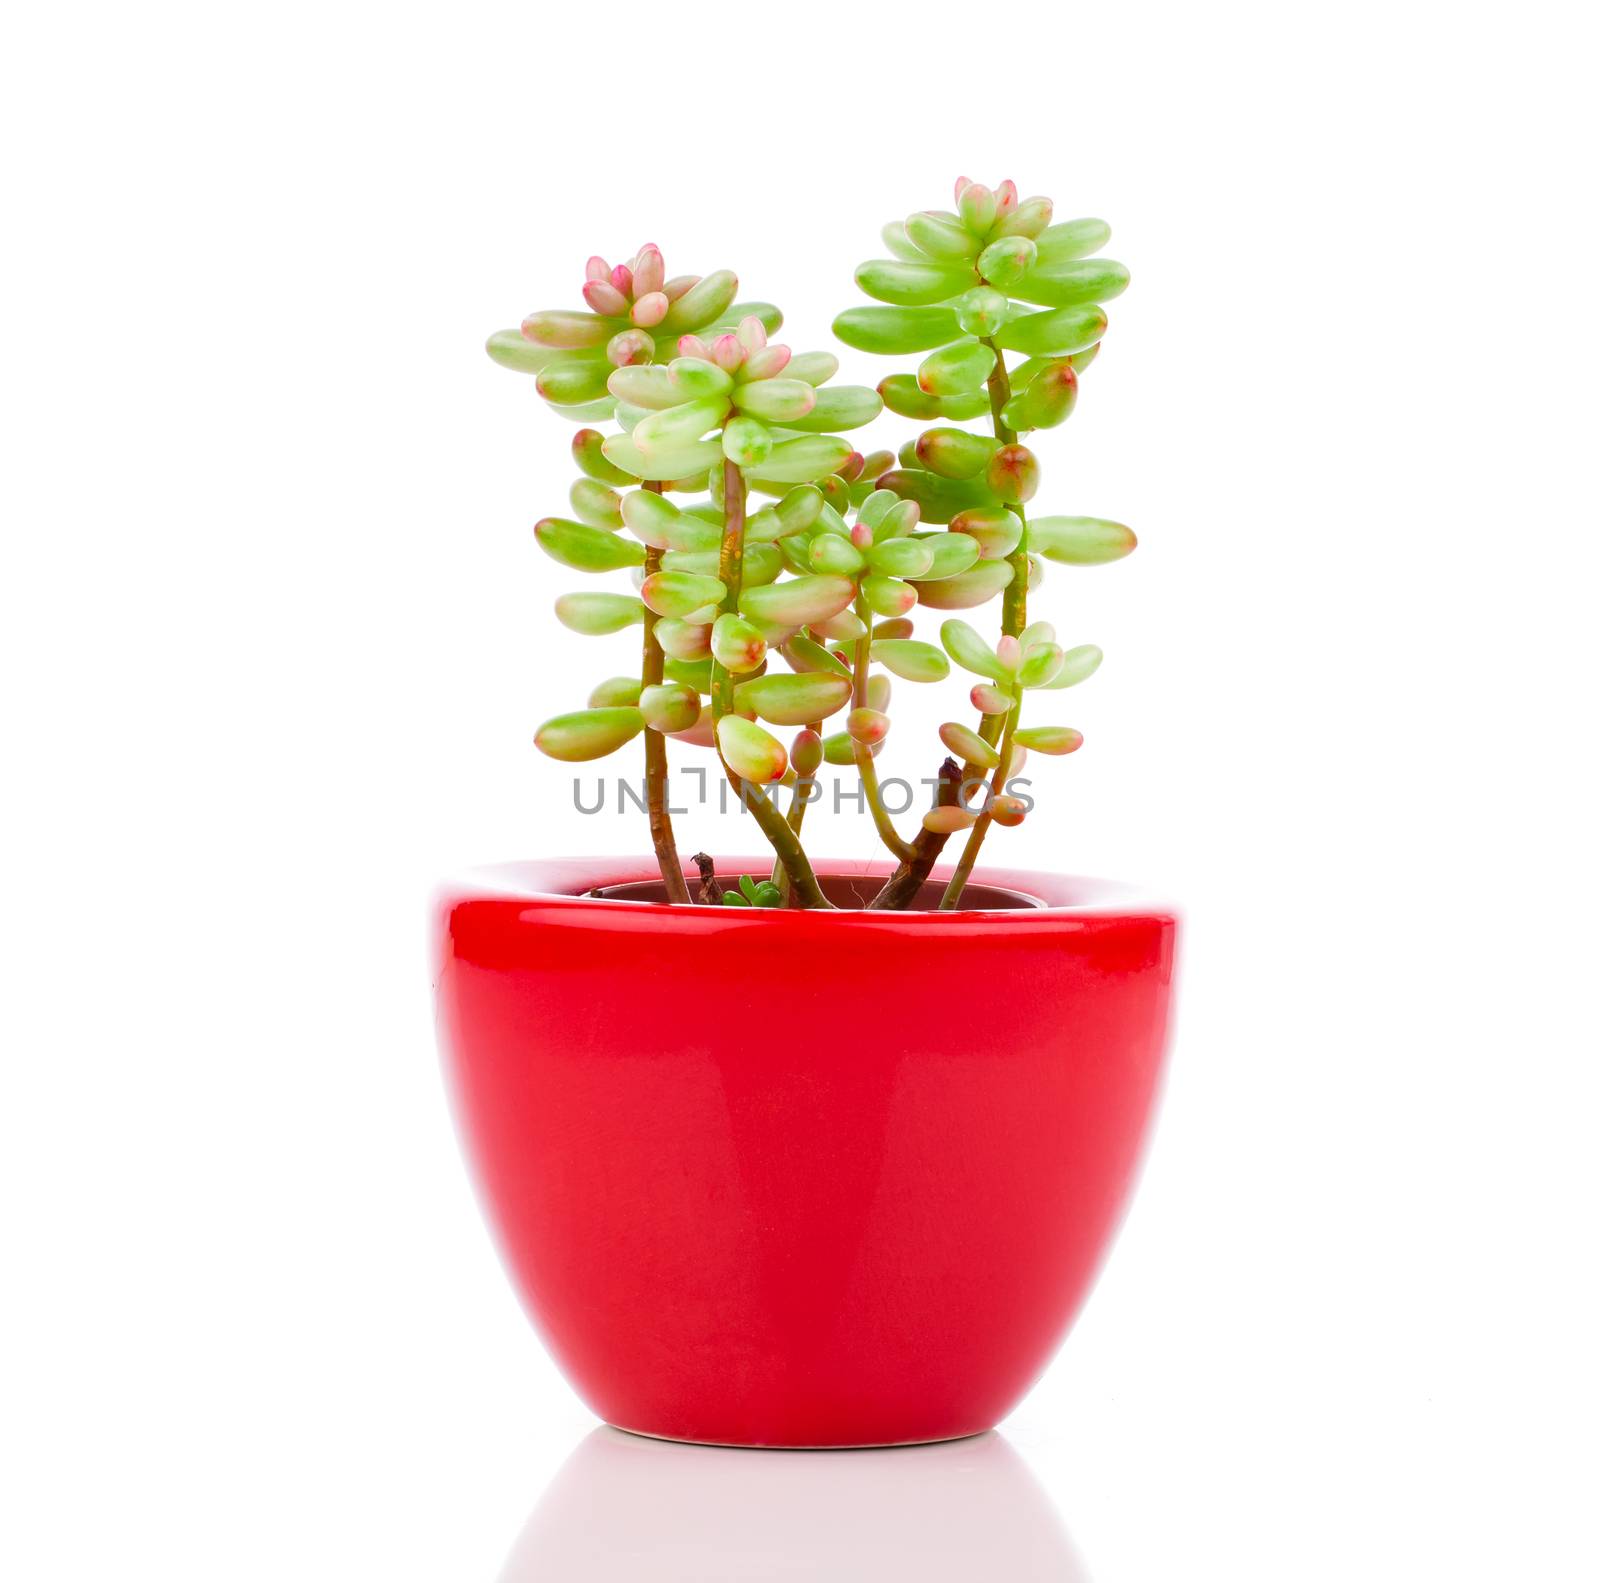 Adromischus houseplant in the red pot, on a white background.